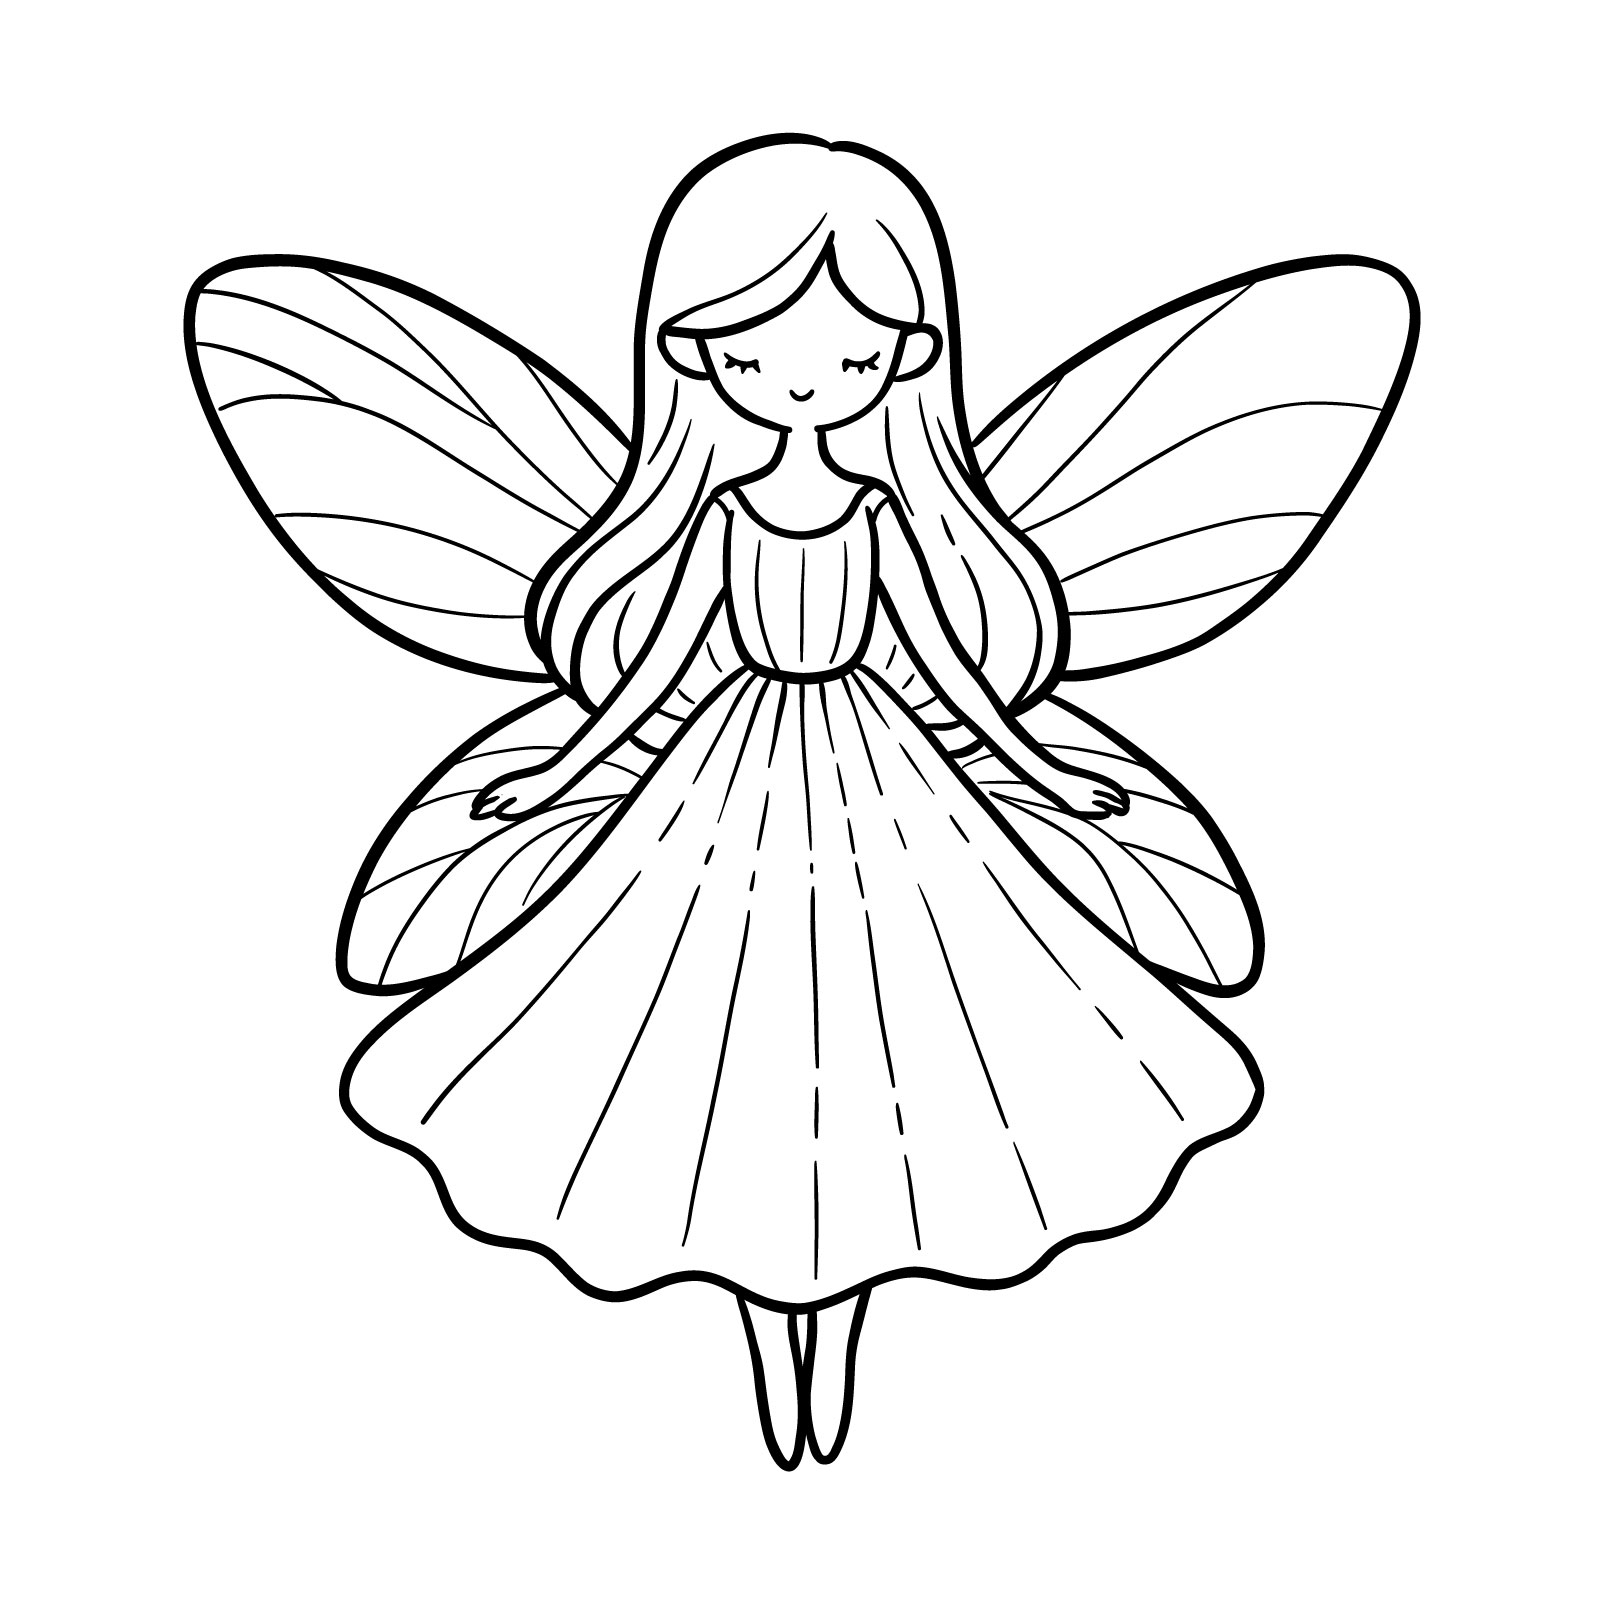 The finished drawing of a cartoon fairy - the third guide on how to draw fairies